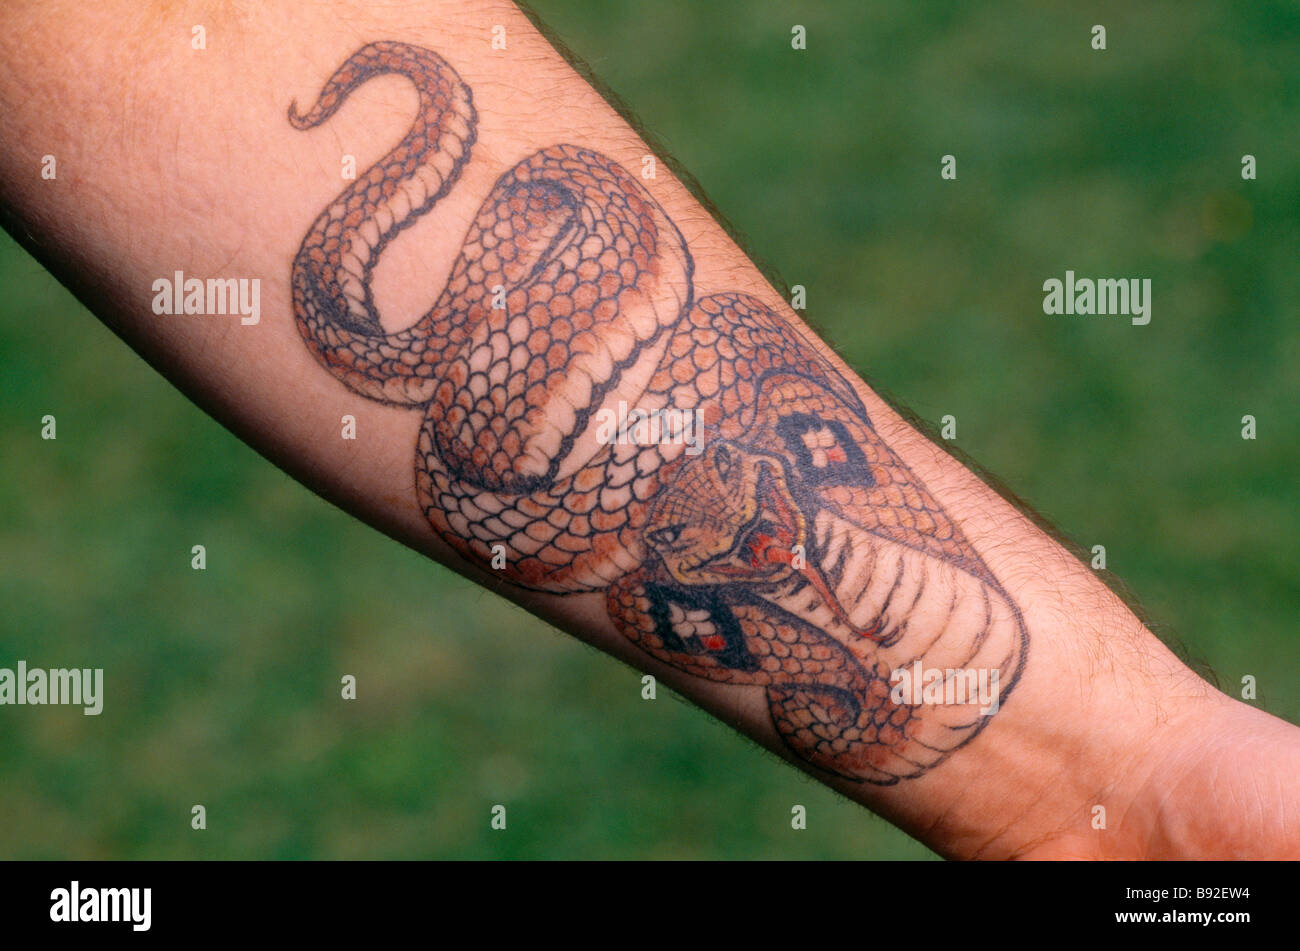 3. Dagger and Snake Tattoo Meaning - wide 4